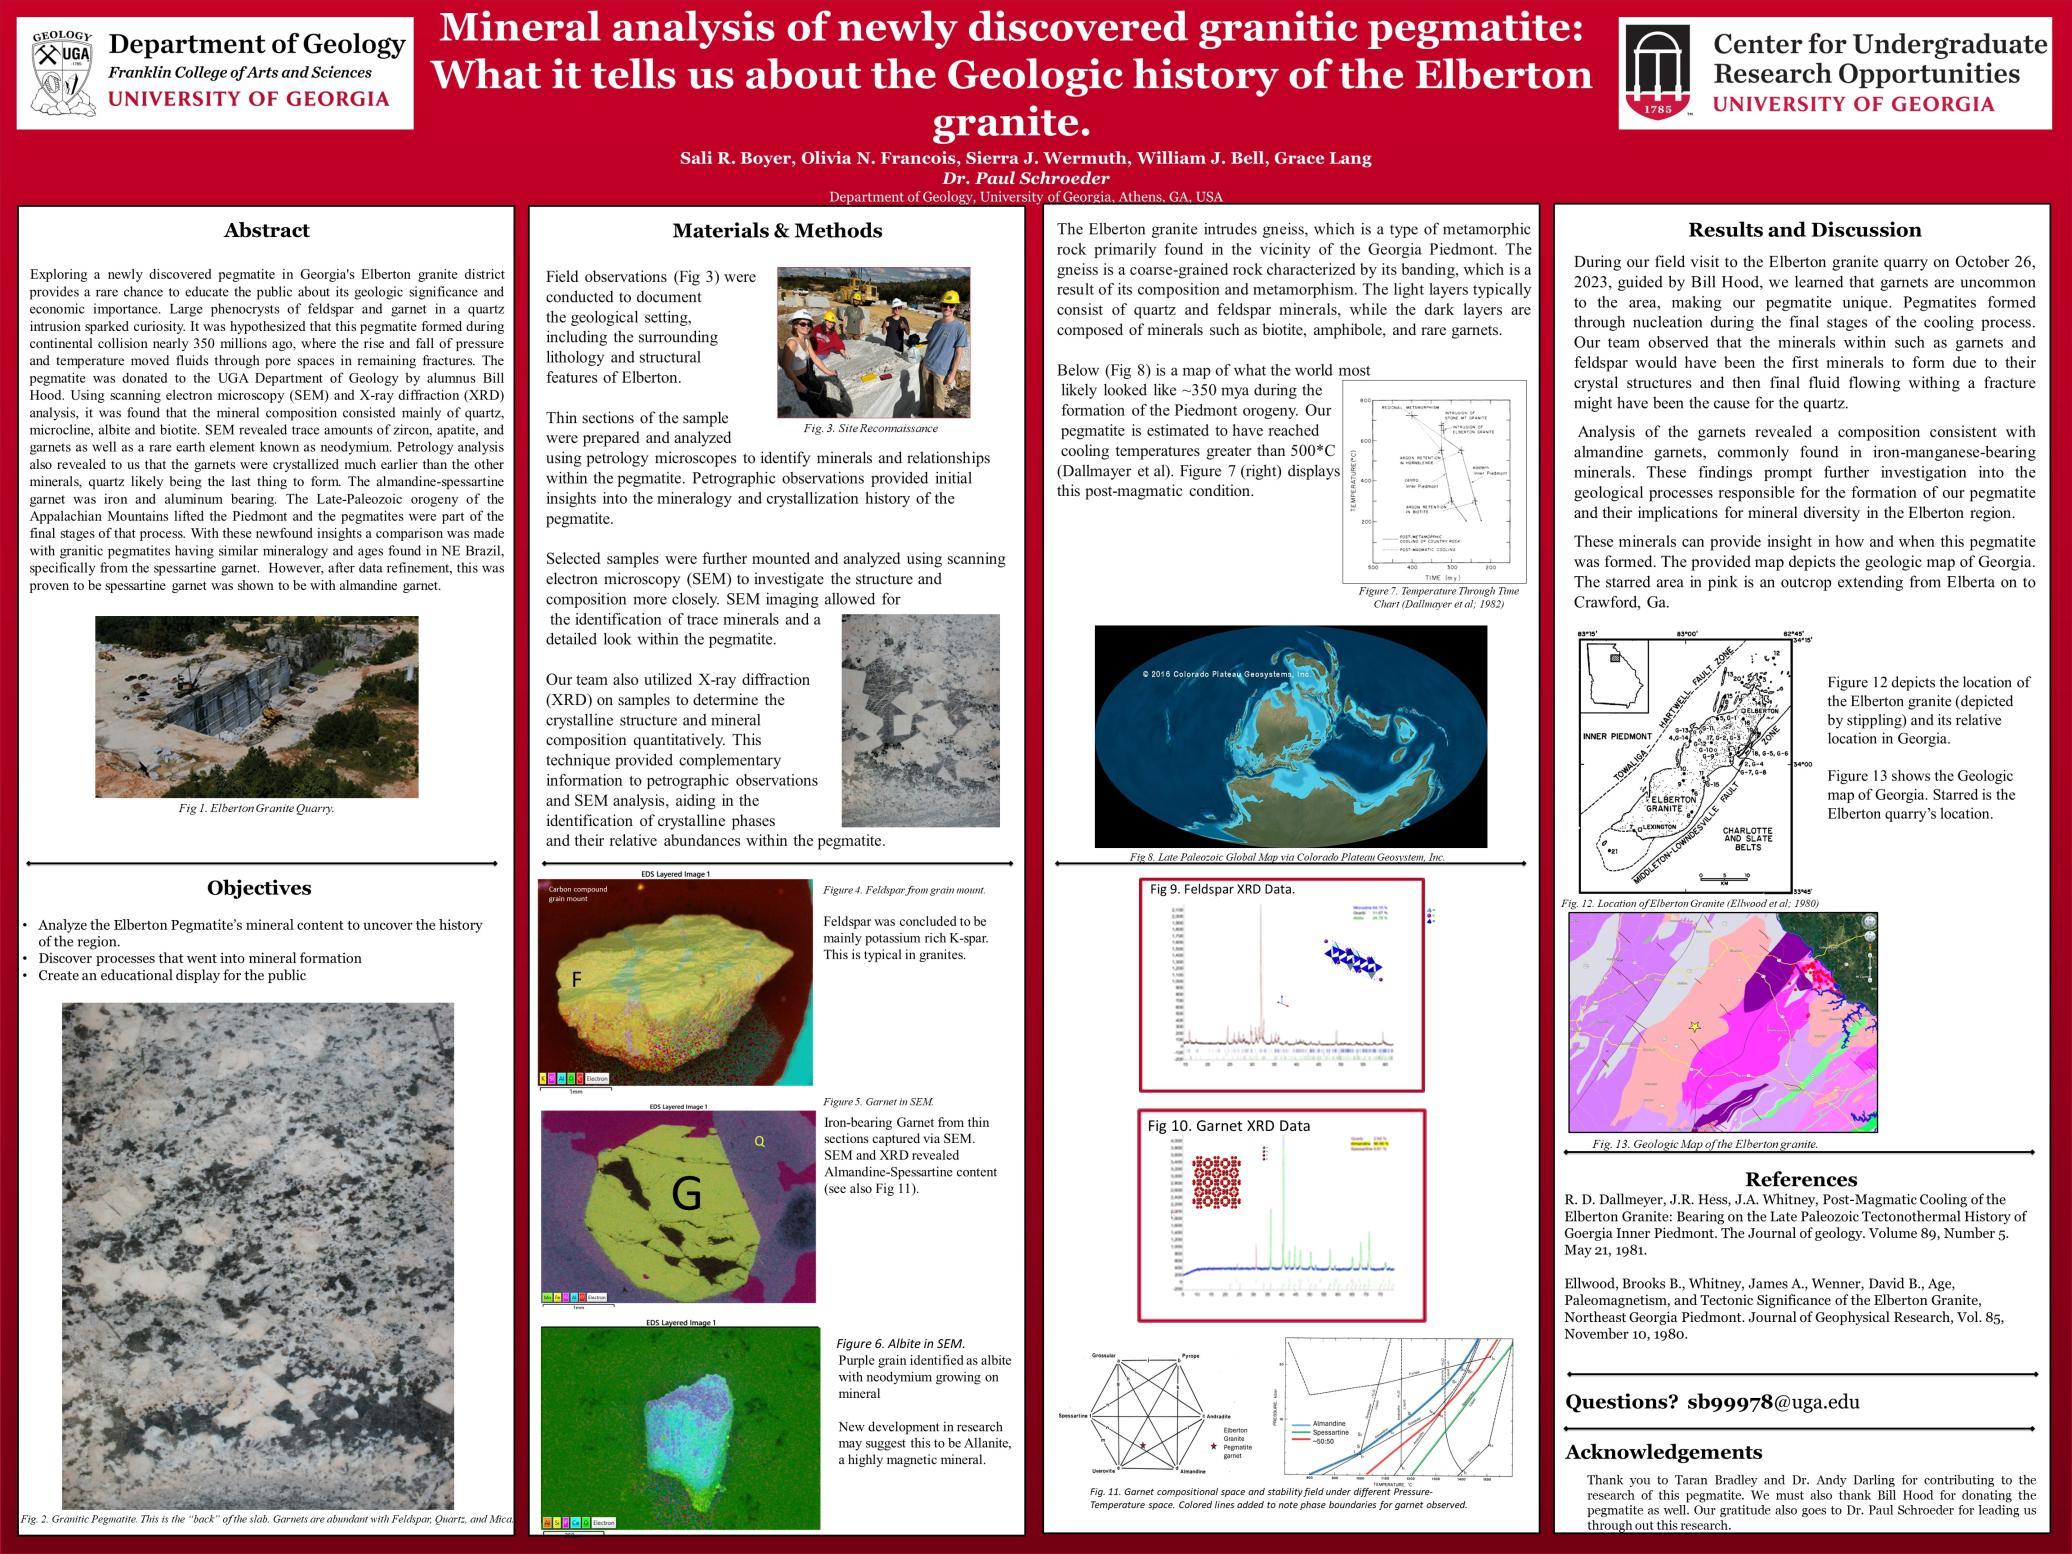 Sali Boyer - Mineral analysis of newly discovered granitic pegmatite: What it tells us about the Geologic history of the Elberton granite